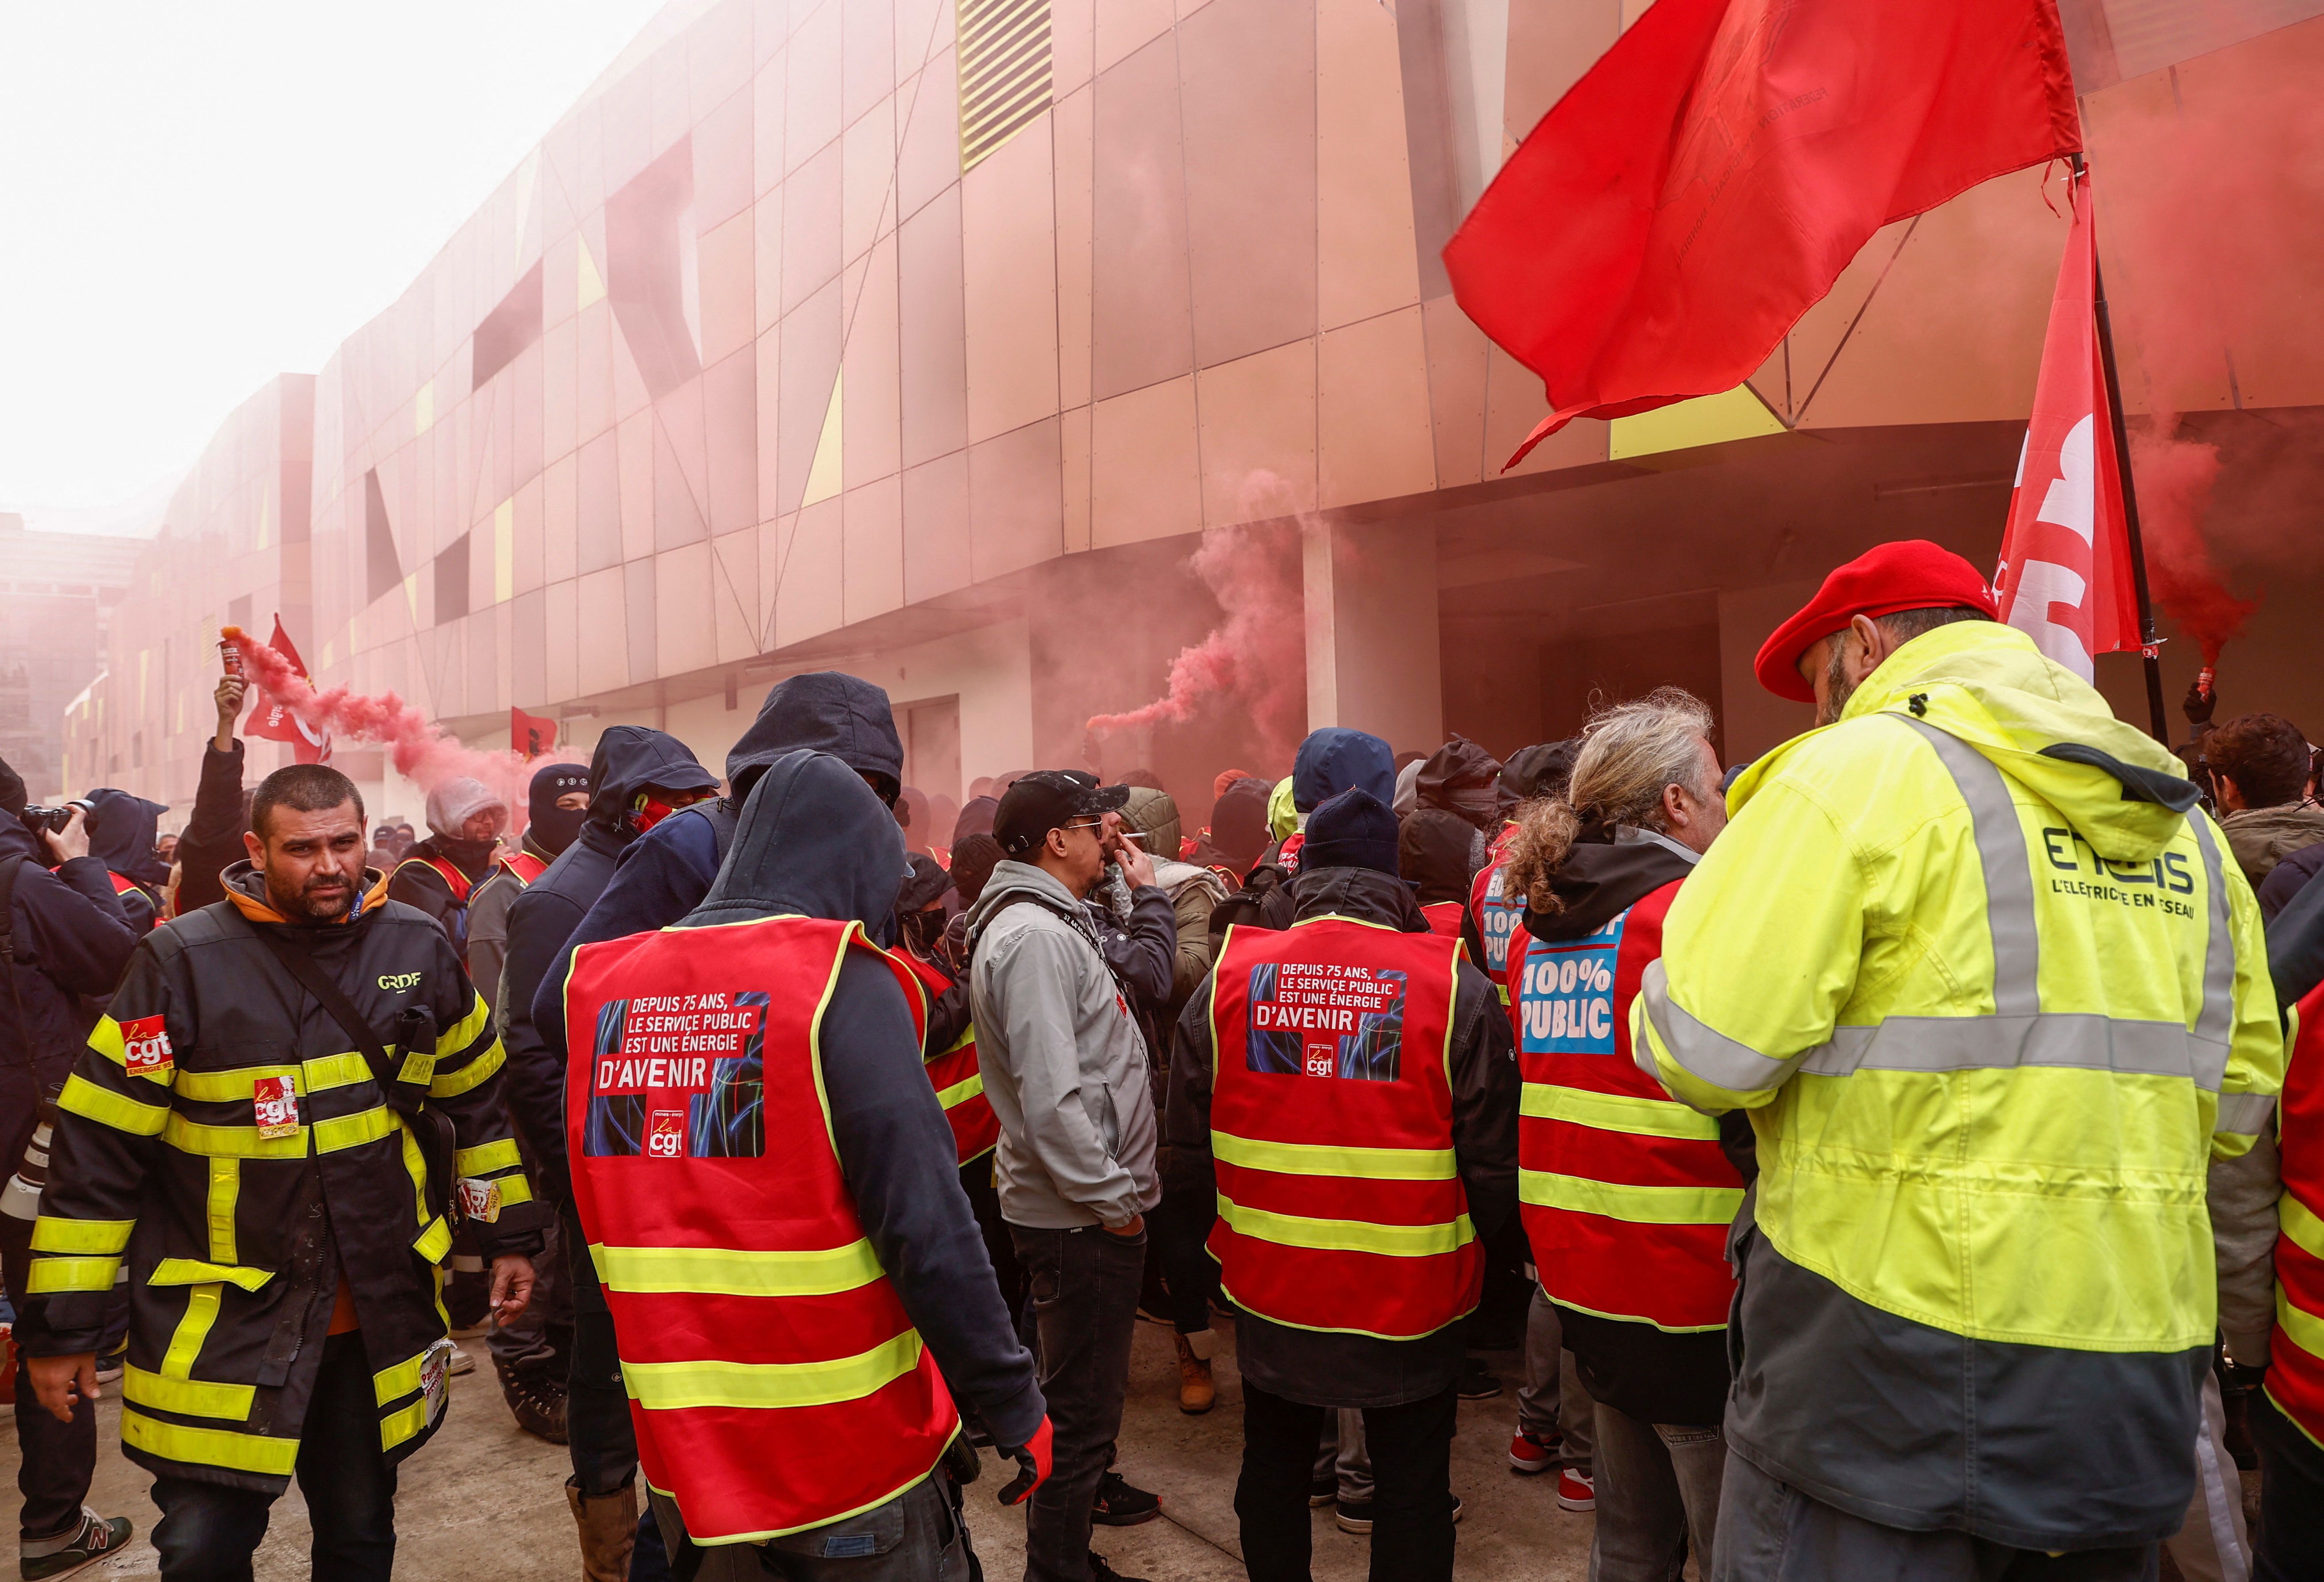 Striking workers cut power to the large sports arena Stade de France and the Olympic village near Paris